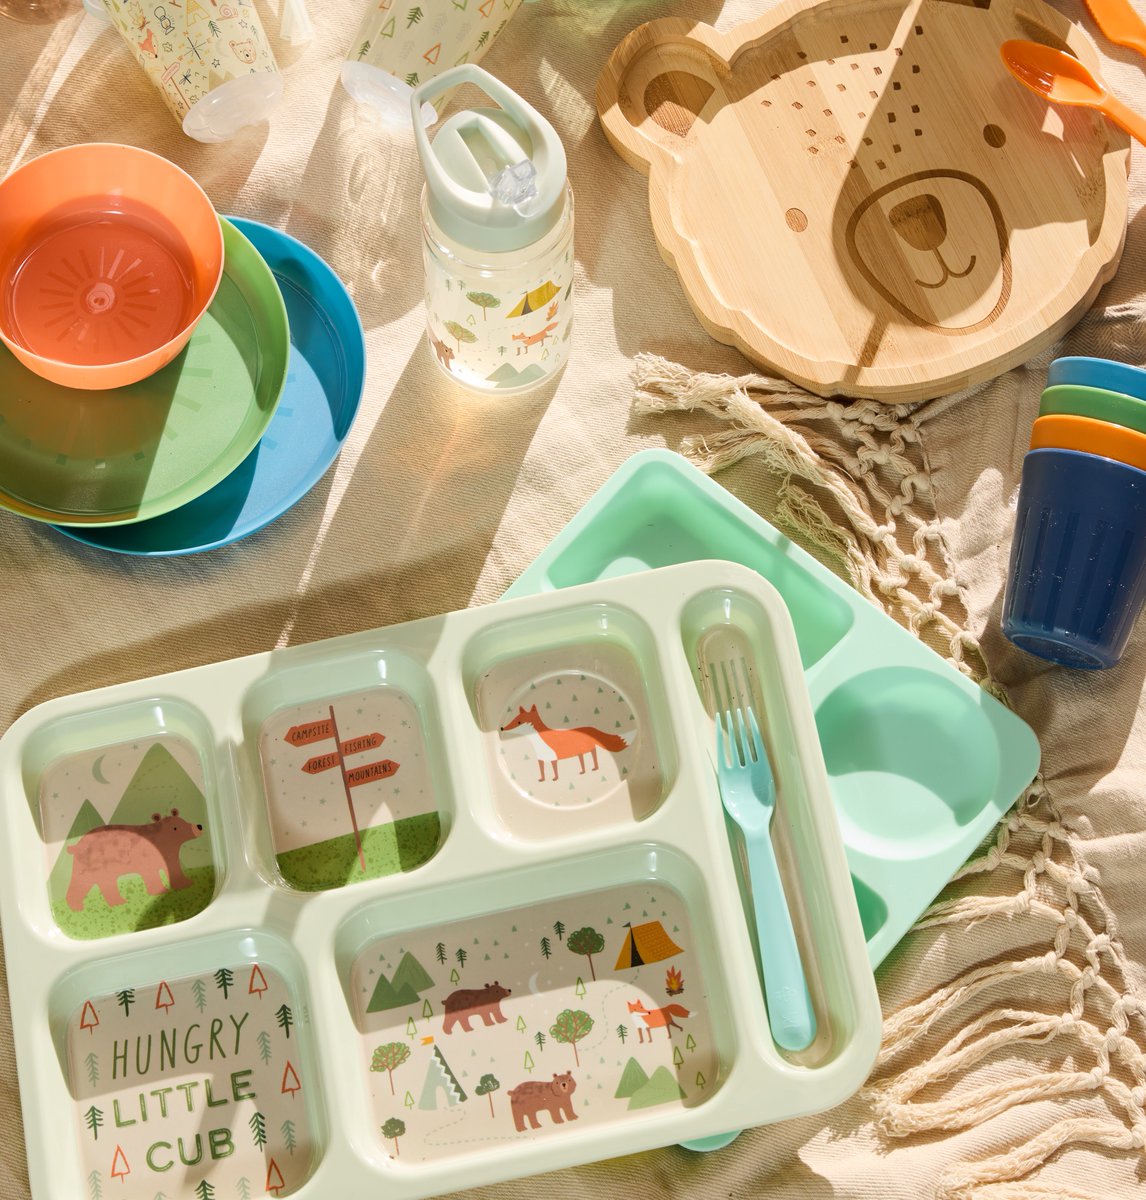 Get ready for half-term and beyond with our incredible picnic range ✨! From bottles to plates and fun lunchboxes; there's everything you need to keep your little one entertained when you head outdoors 🥰 (or stay inside!)! Who'll be popping into B&M this week🌞?